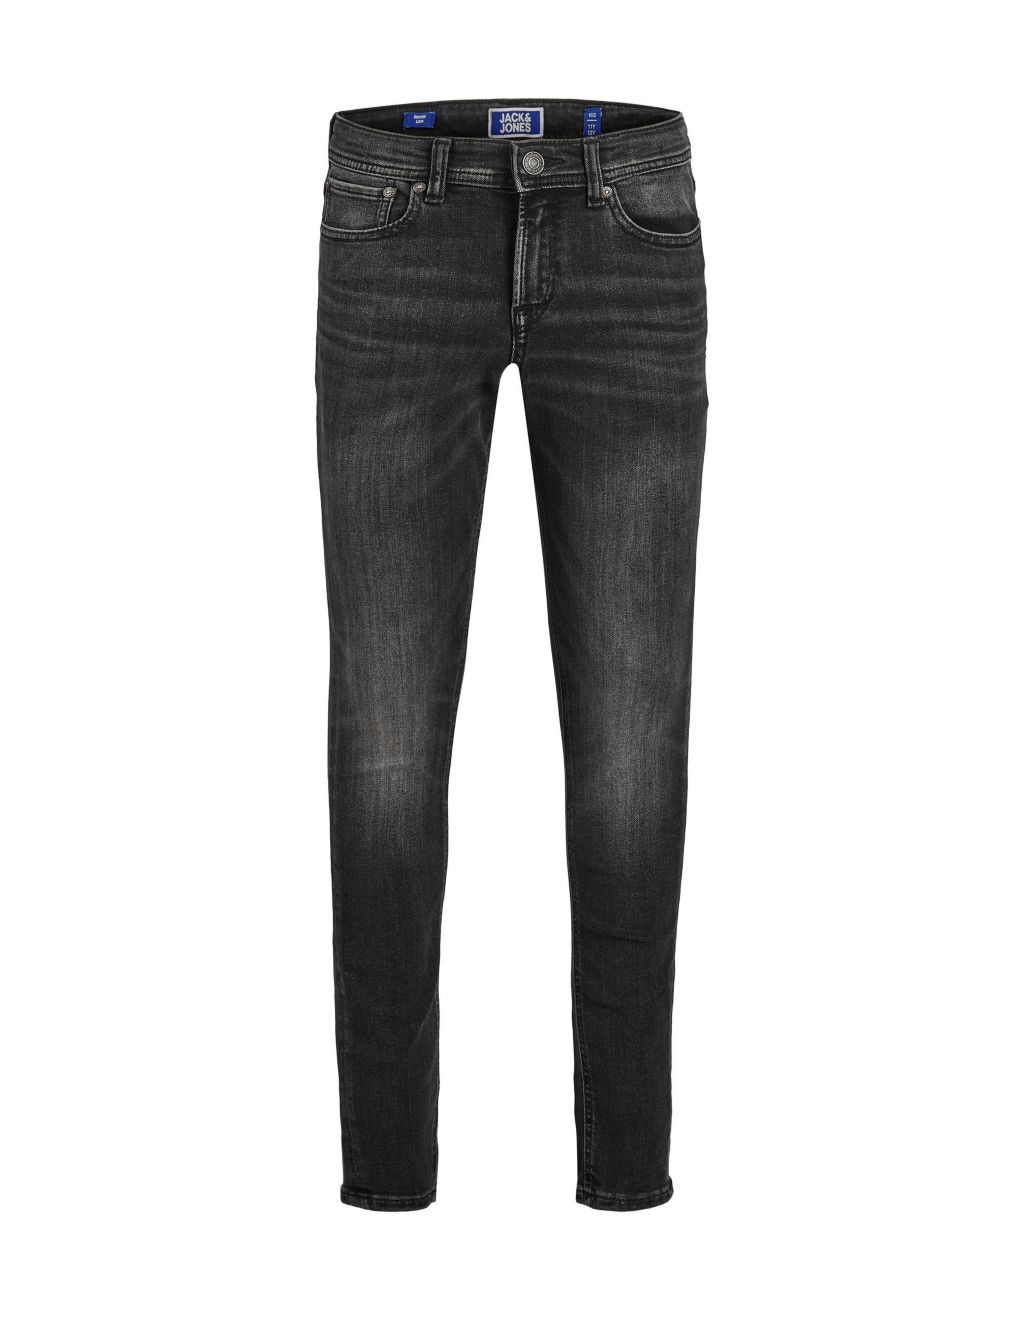 Cotton Rich Slim Fit Jeans (8 Yrs - 16 Yrs) image 2